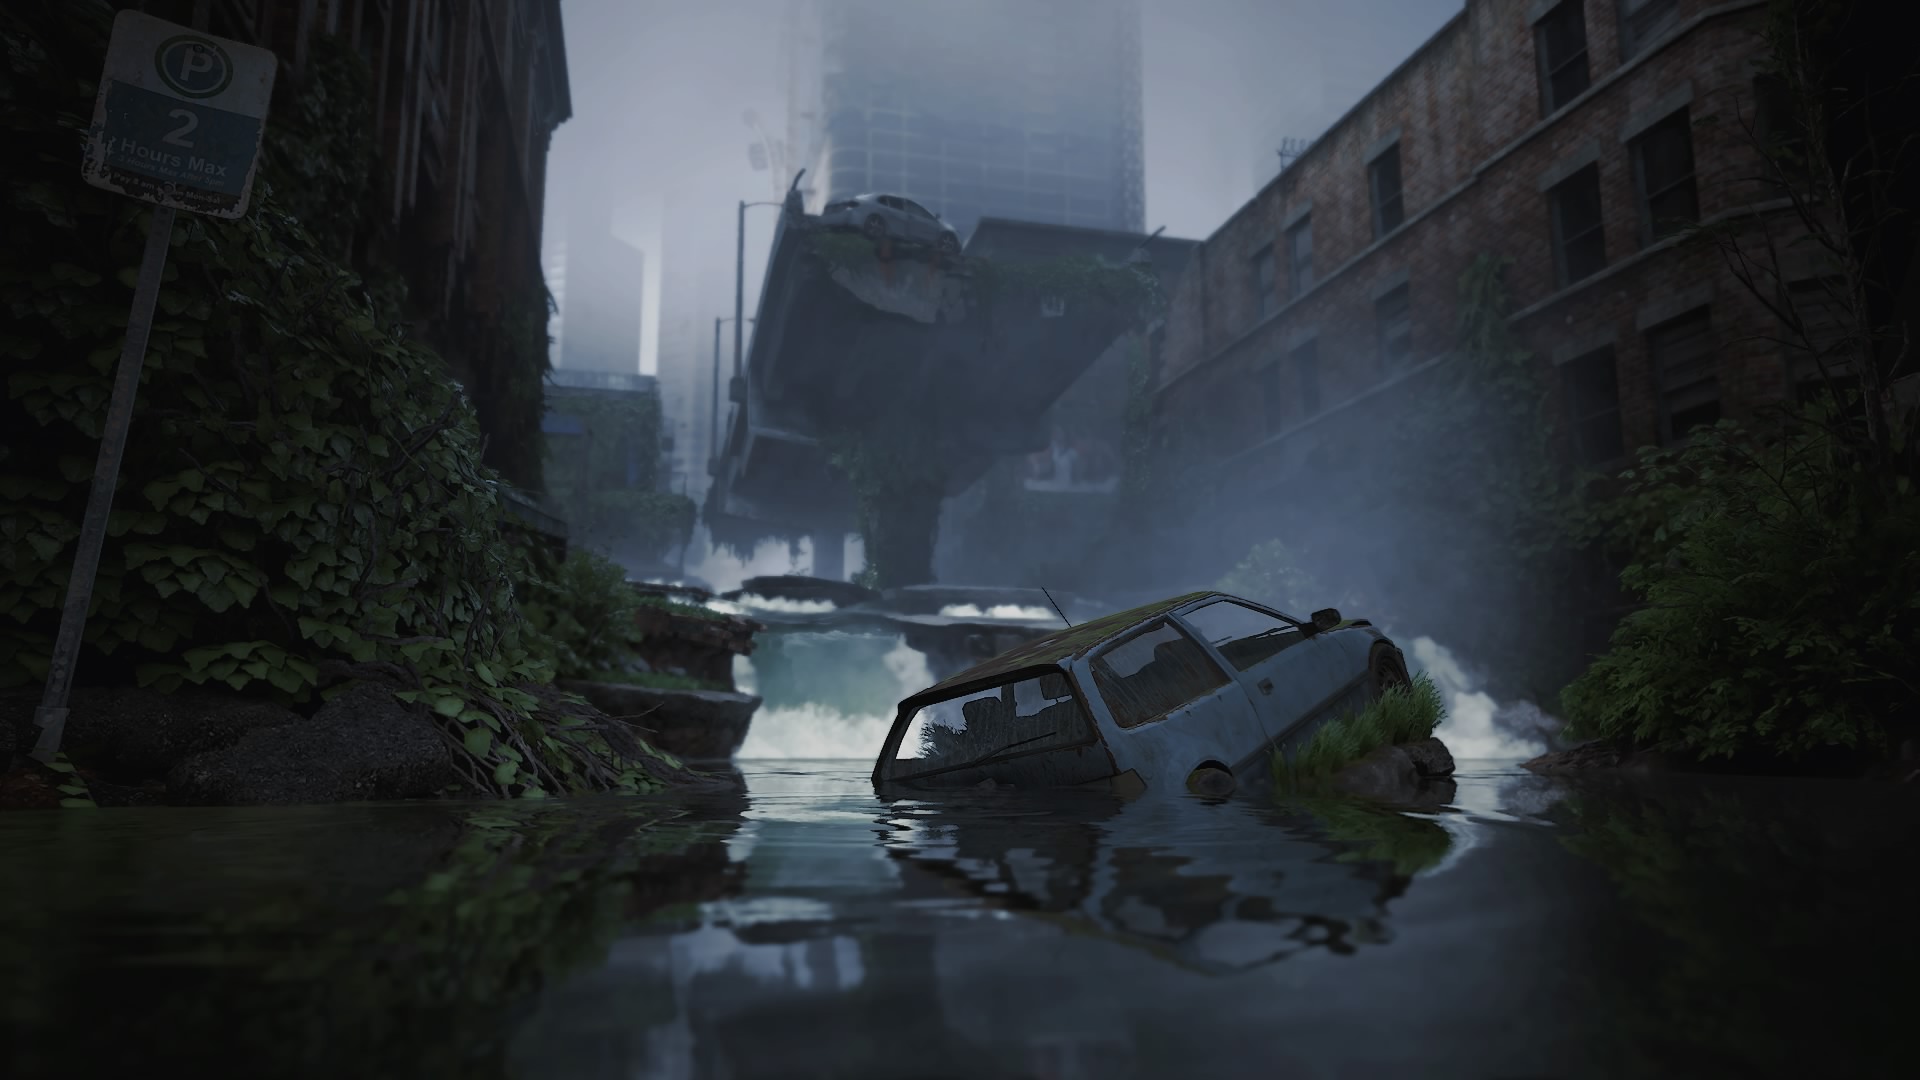 The Last Of Us The Last Of Us 2 Naughty Dog PlayStation 4 Video Game Art Screen Shot Video Games CGi 1920x1080